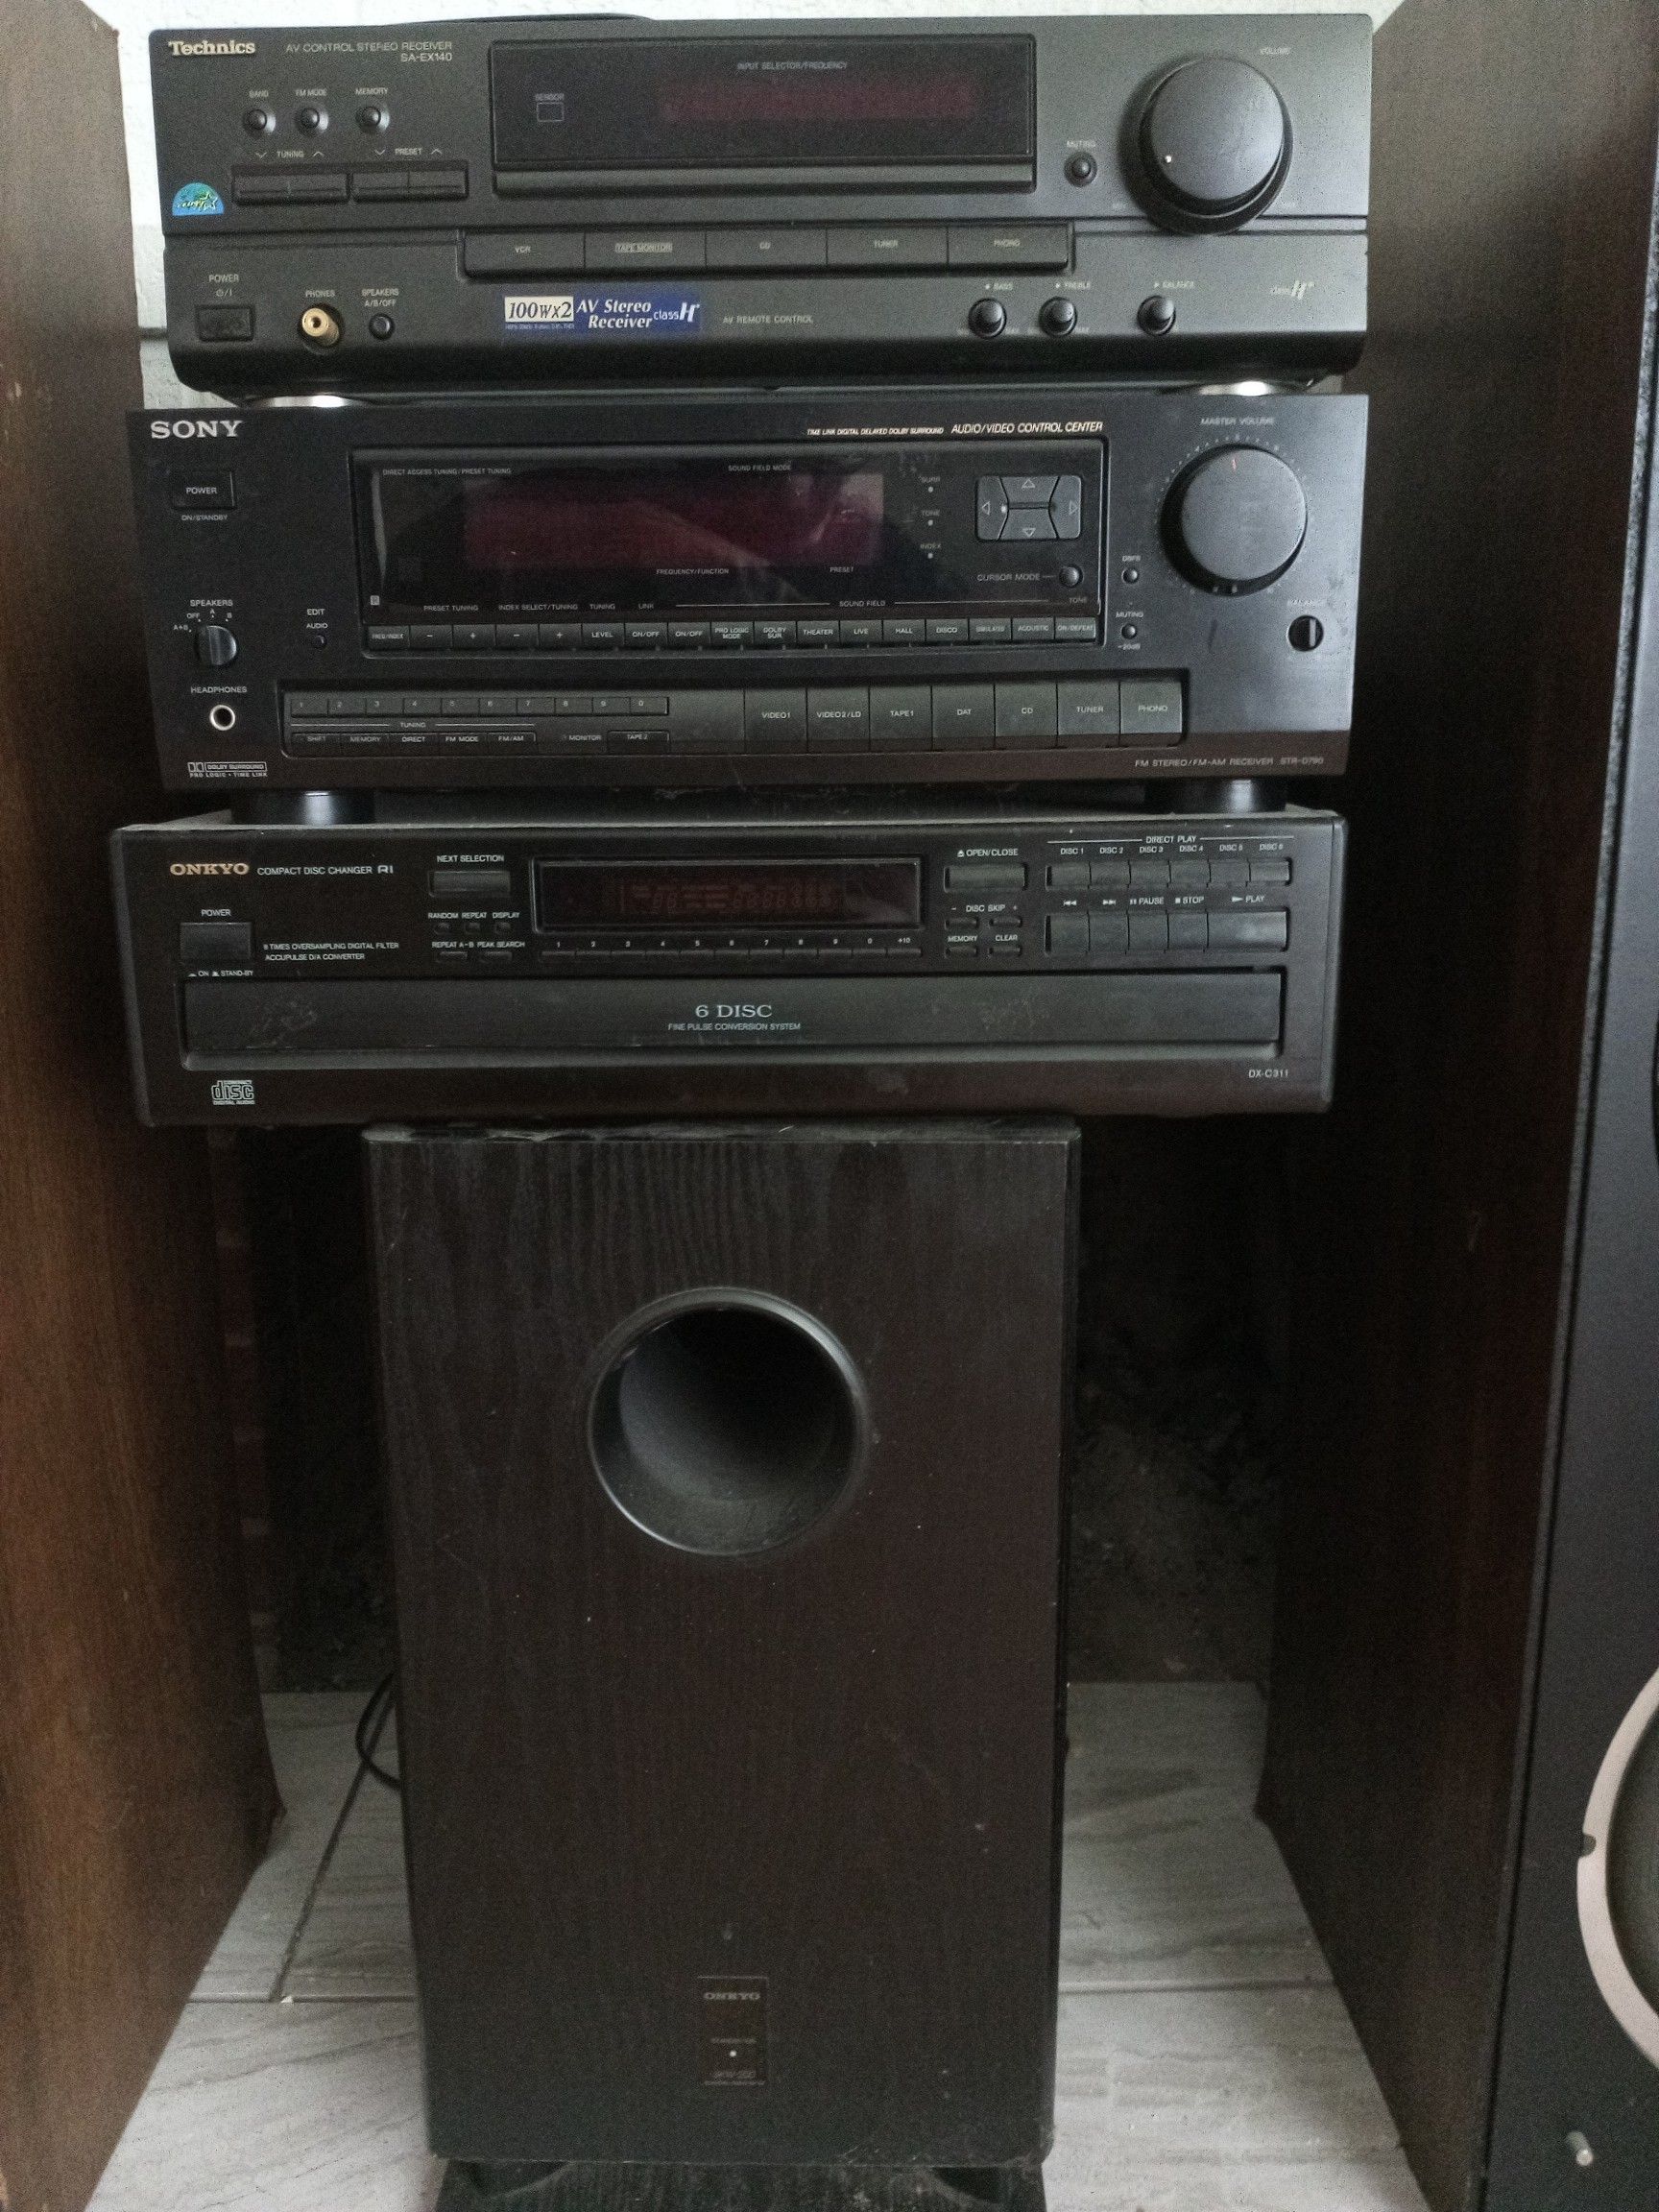 Great Sounding Stereo System